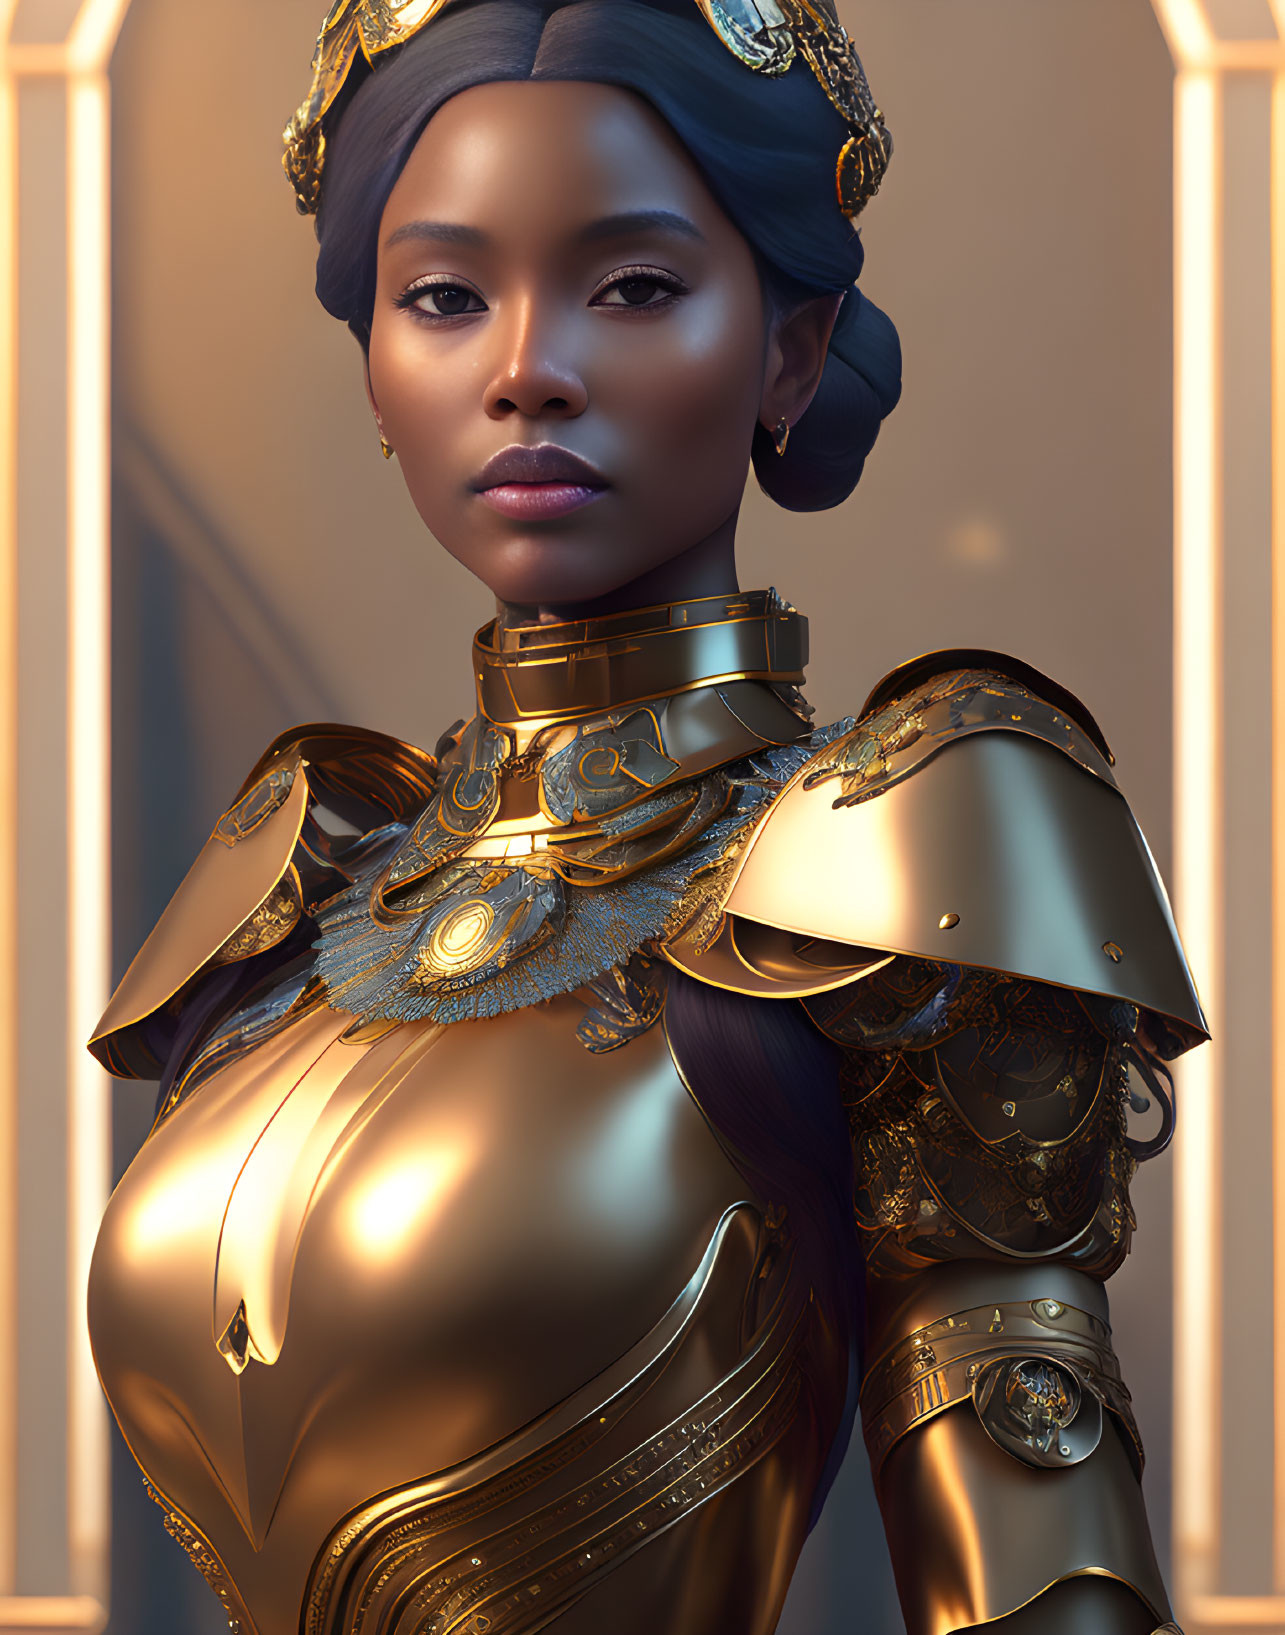 Regal Woman in Luxurious Golden Armor and Crowned Headpiece